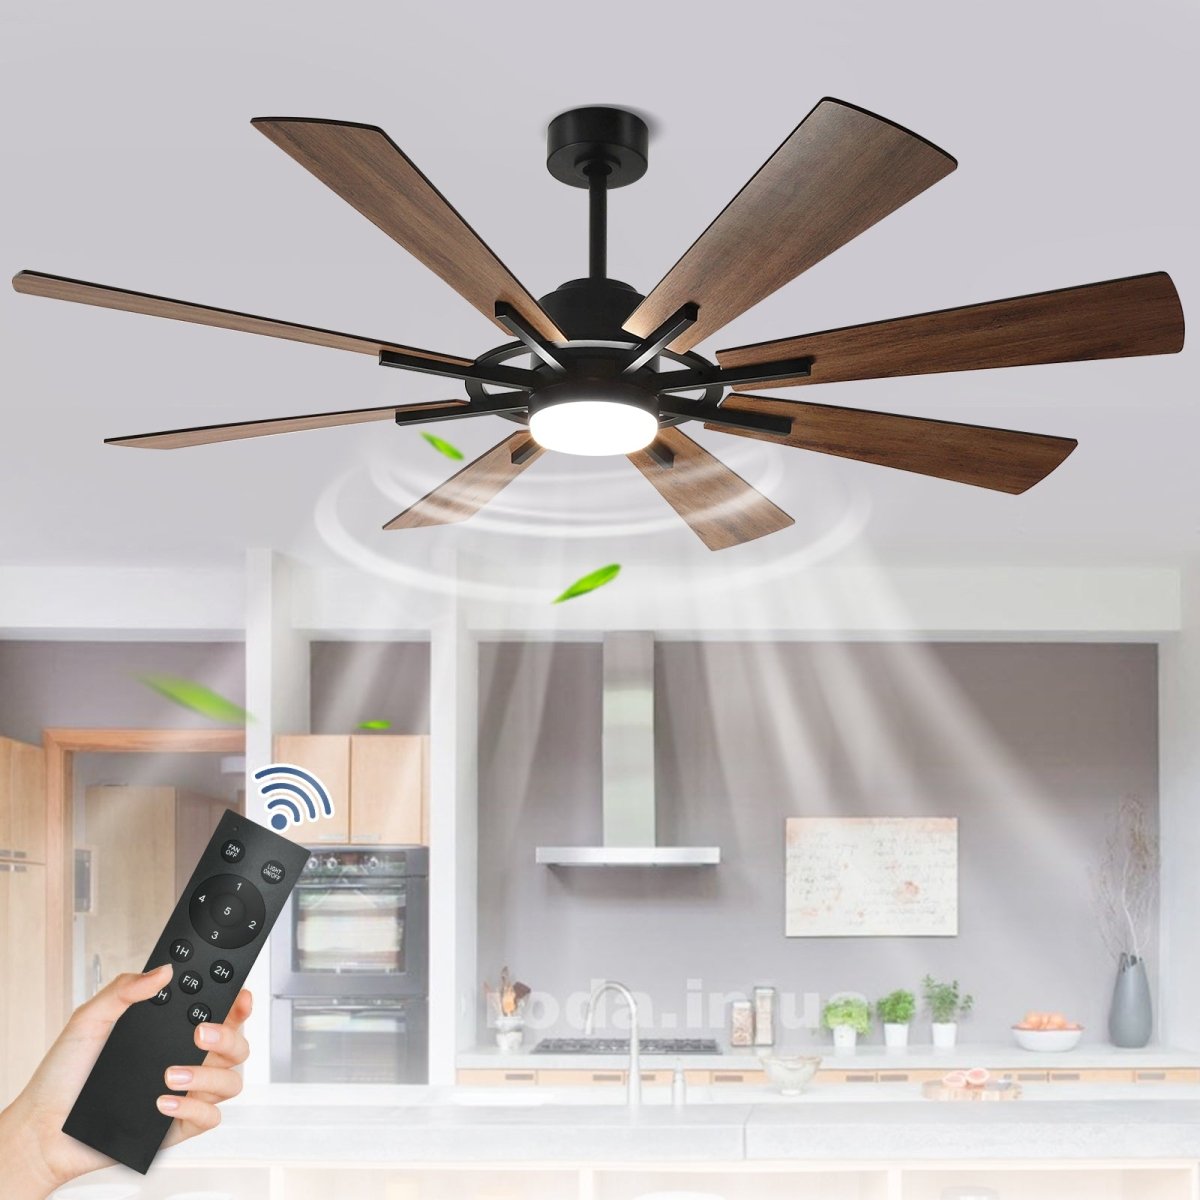 Depuley 60" Ceiling Fan with Lights and Remote Control, Farmhouse Large Ceiling Fan, Reversible Motor and 8 Blades, 3CCT Selectable for Living Room Basement Porch Patio, 5-Speed Remote Control, Timer - WS-FPZ44-18C-BR 1 | DEPULEY